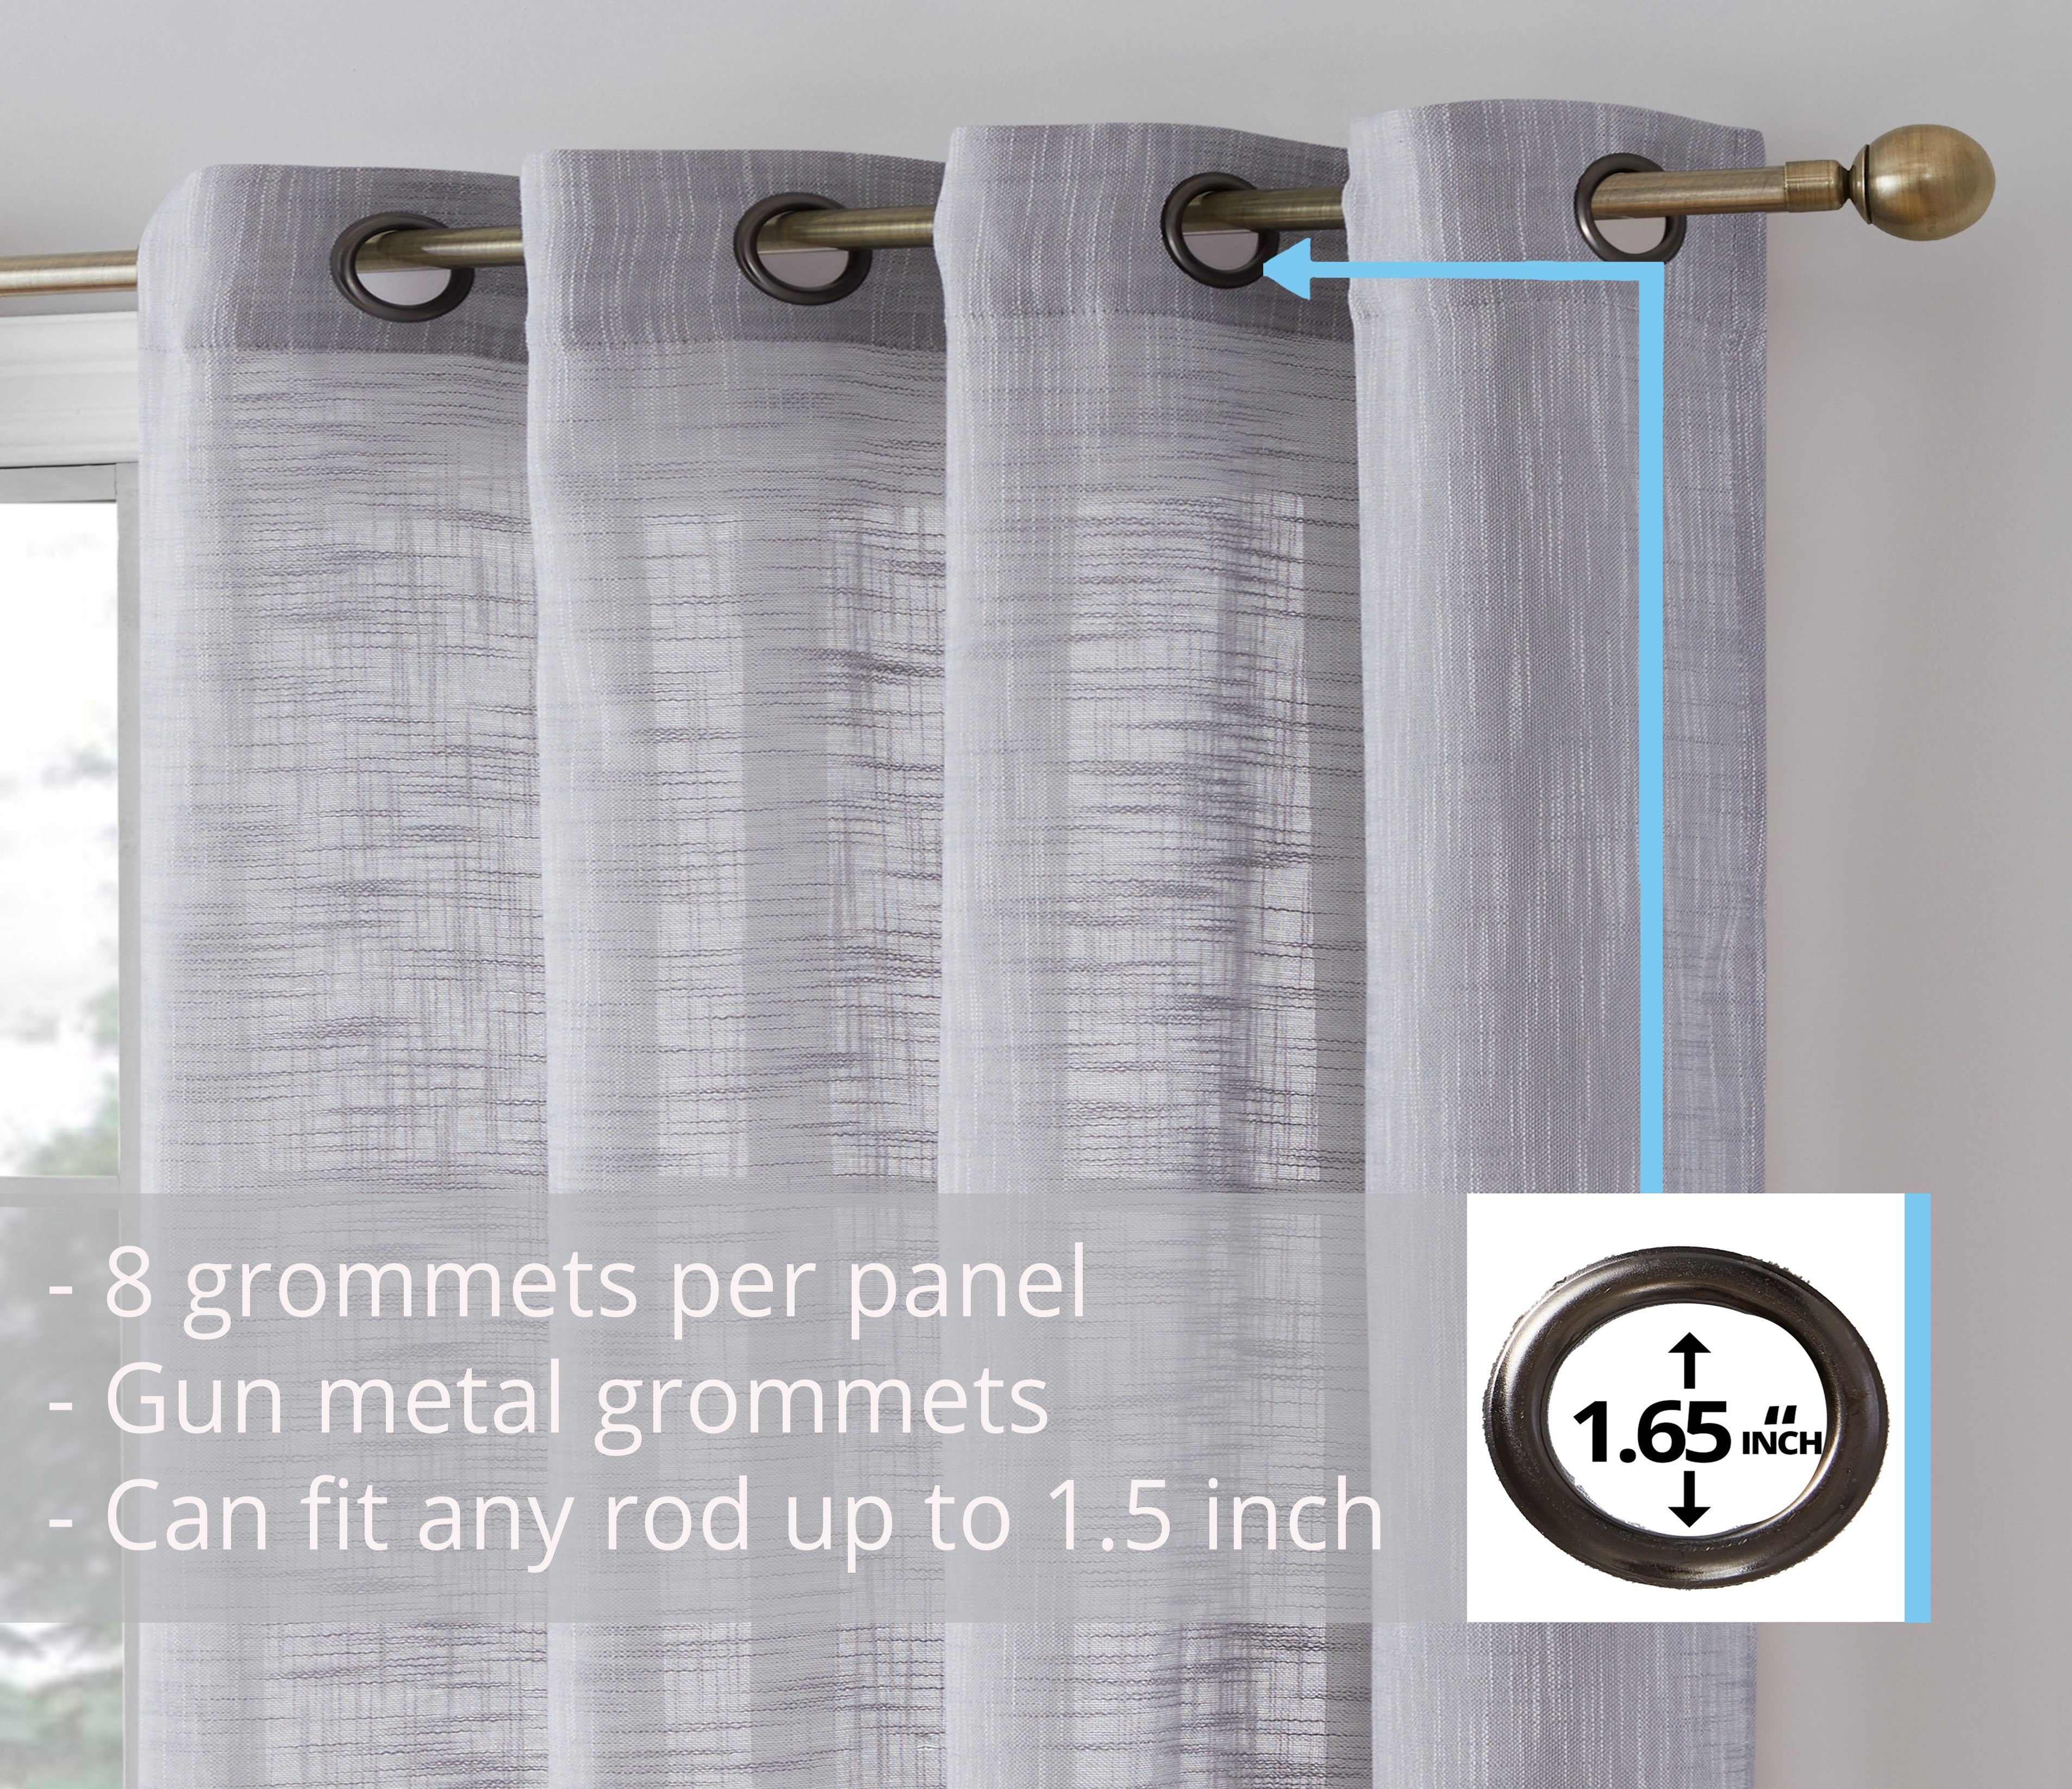 Extra Long Faux Linen Semi Sheer Window Curtain 144 inches - Solid Grey  Lightweight & Airy Gauzy Panels/Drapes with Grommet Top for High Living  Room